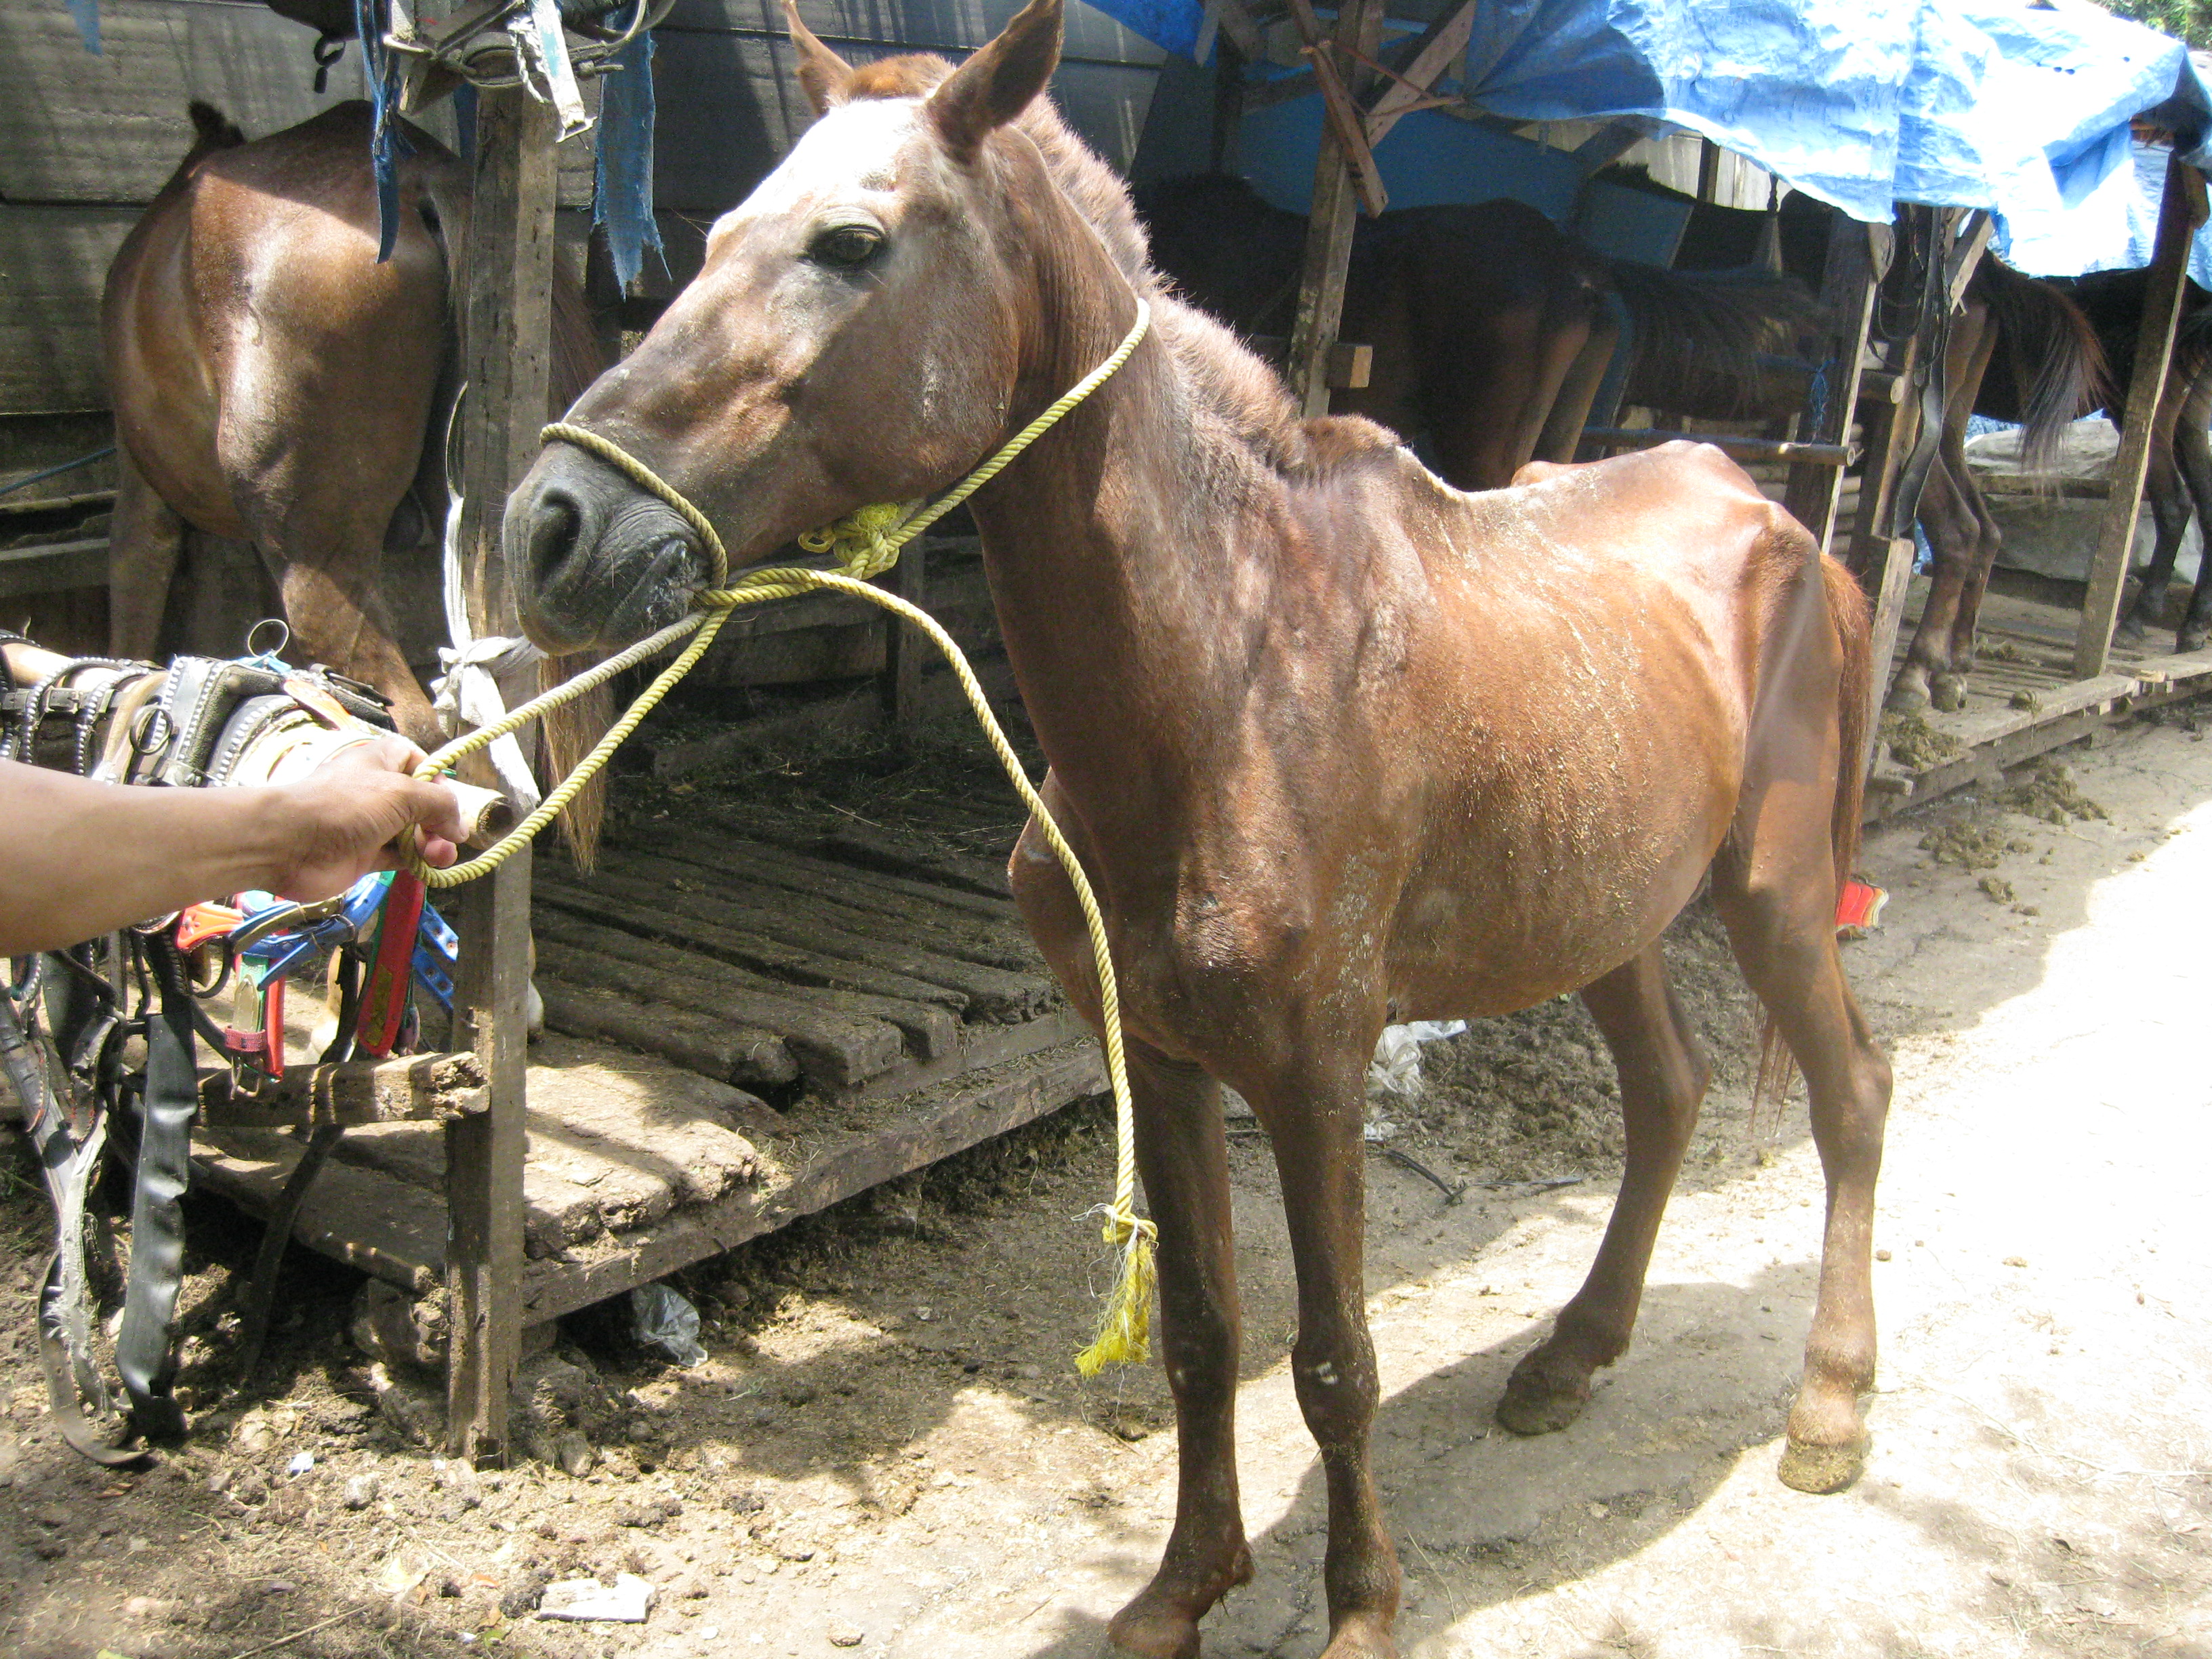 The average Indonesian horse used for carriages. Very skinny and unhealthy.